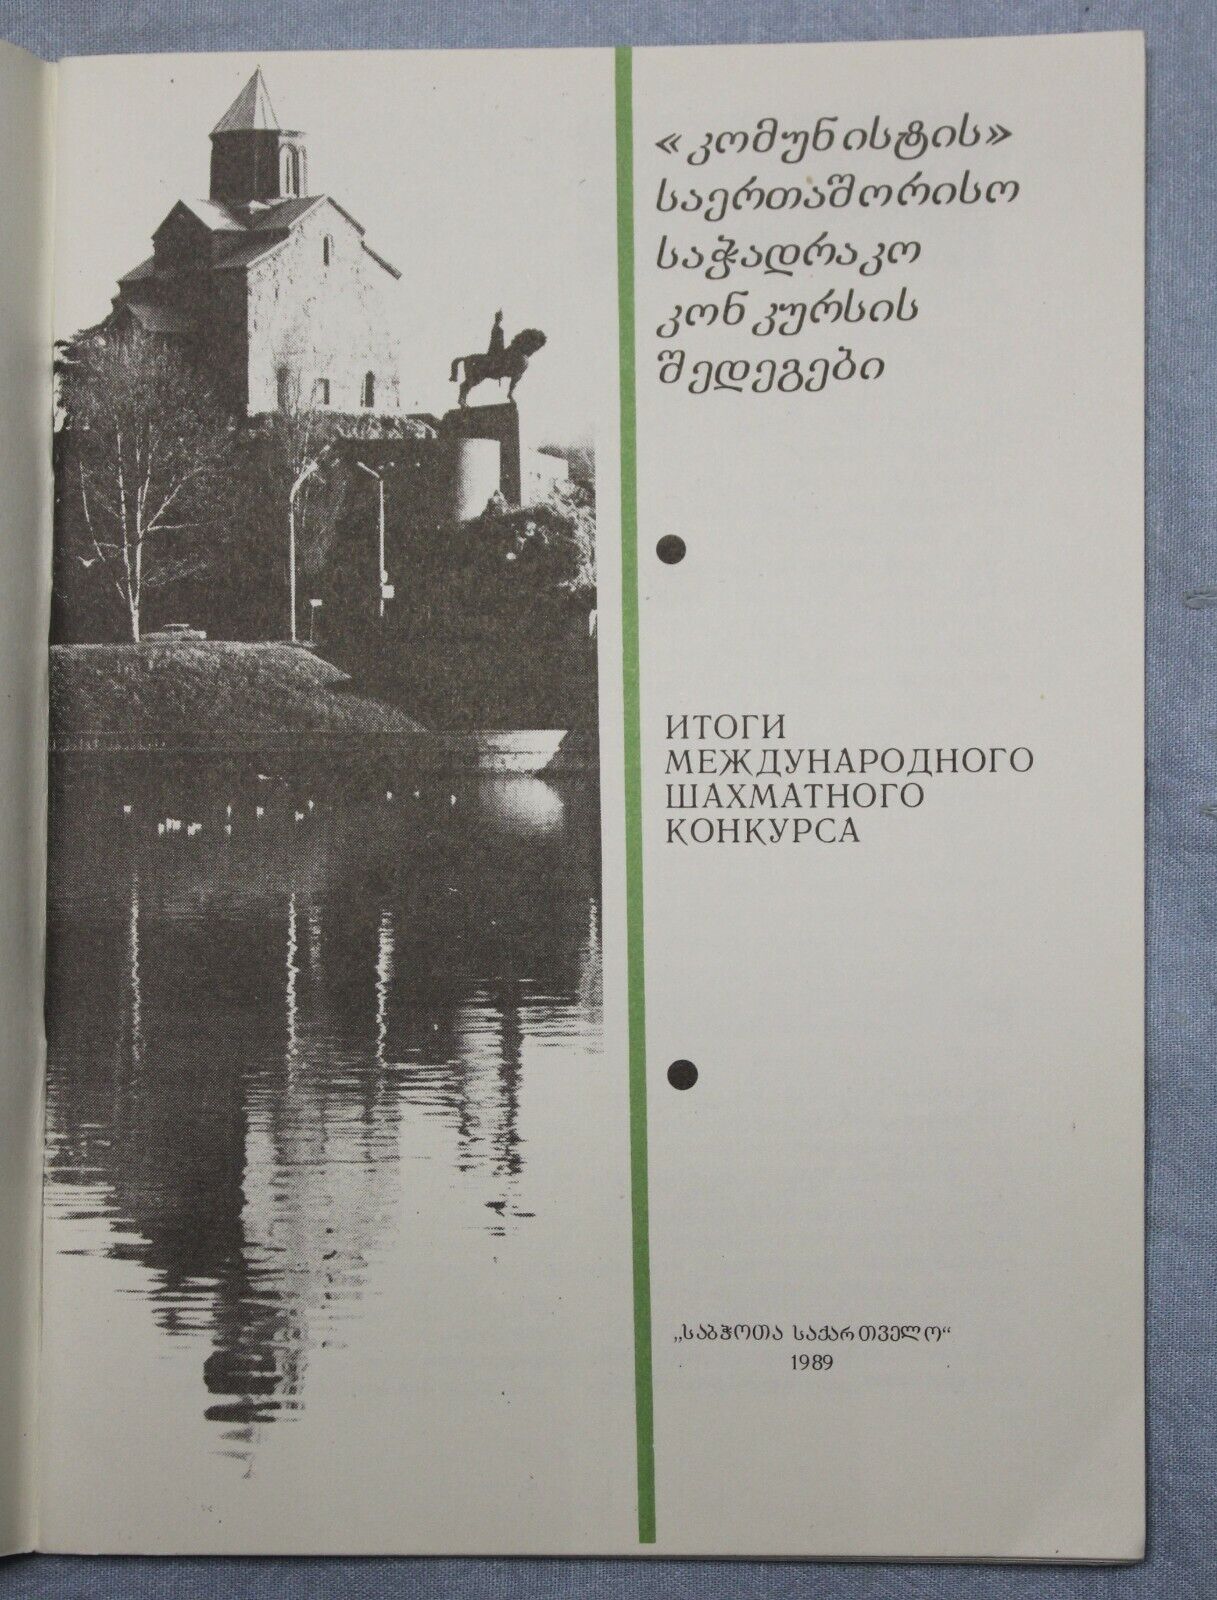 11105.Chess book: Results Of The International Chess Competition w Photos Tbilisi 1989